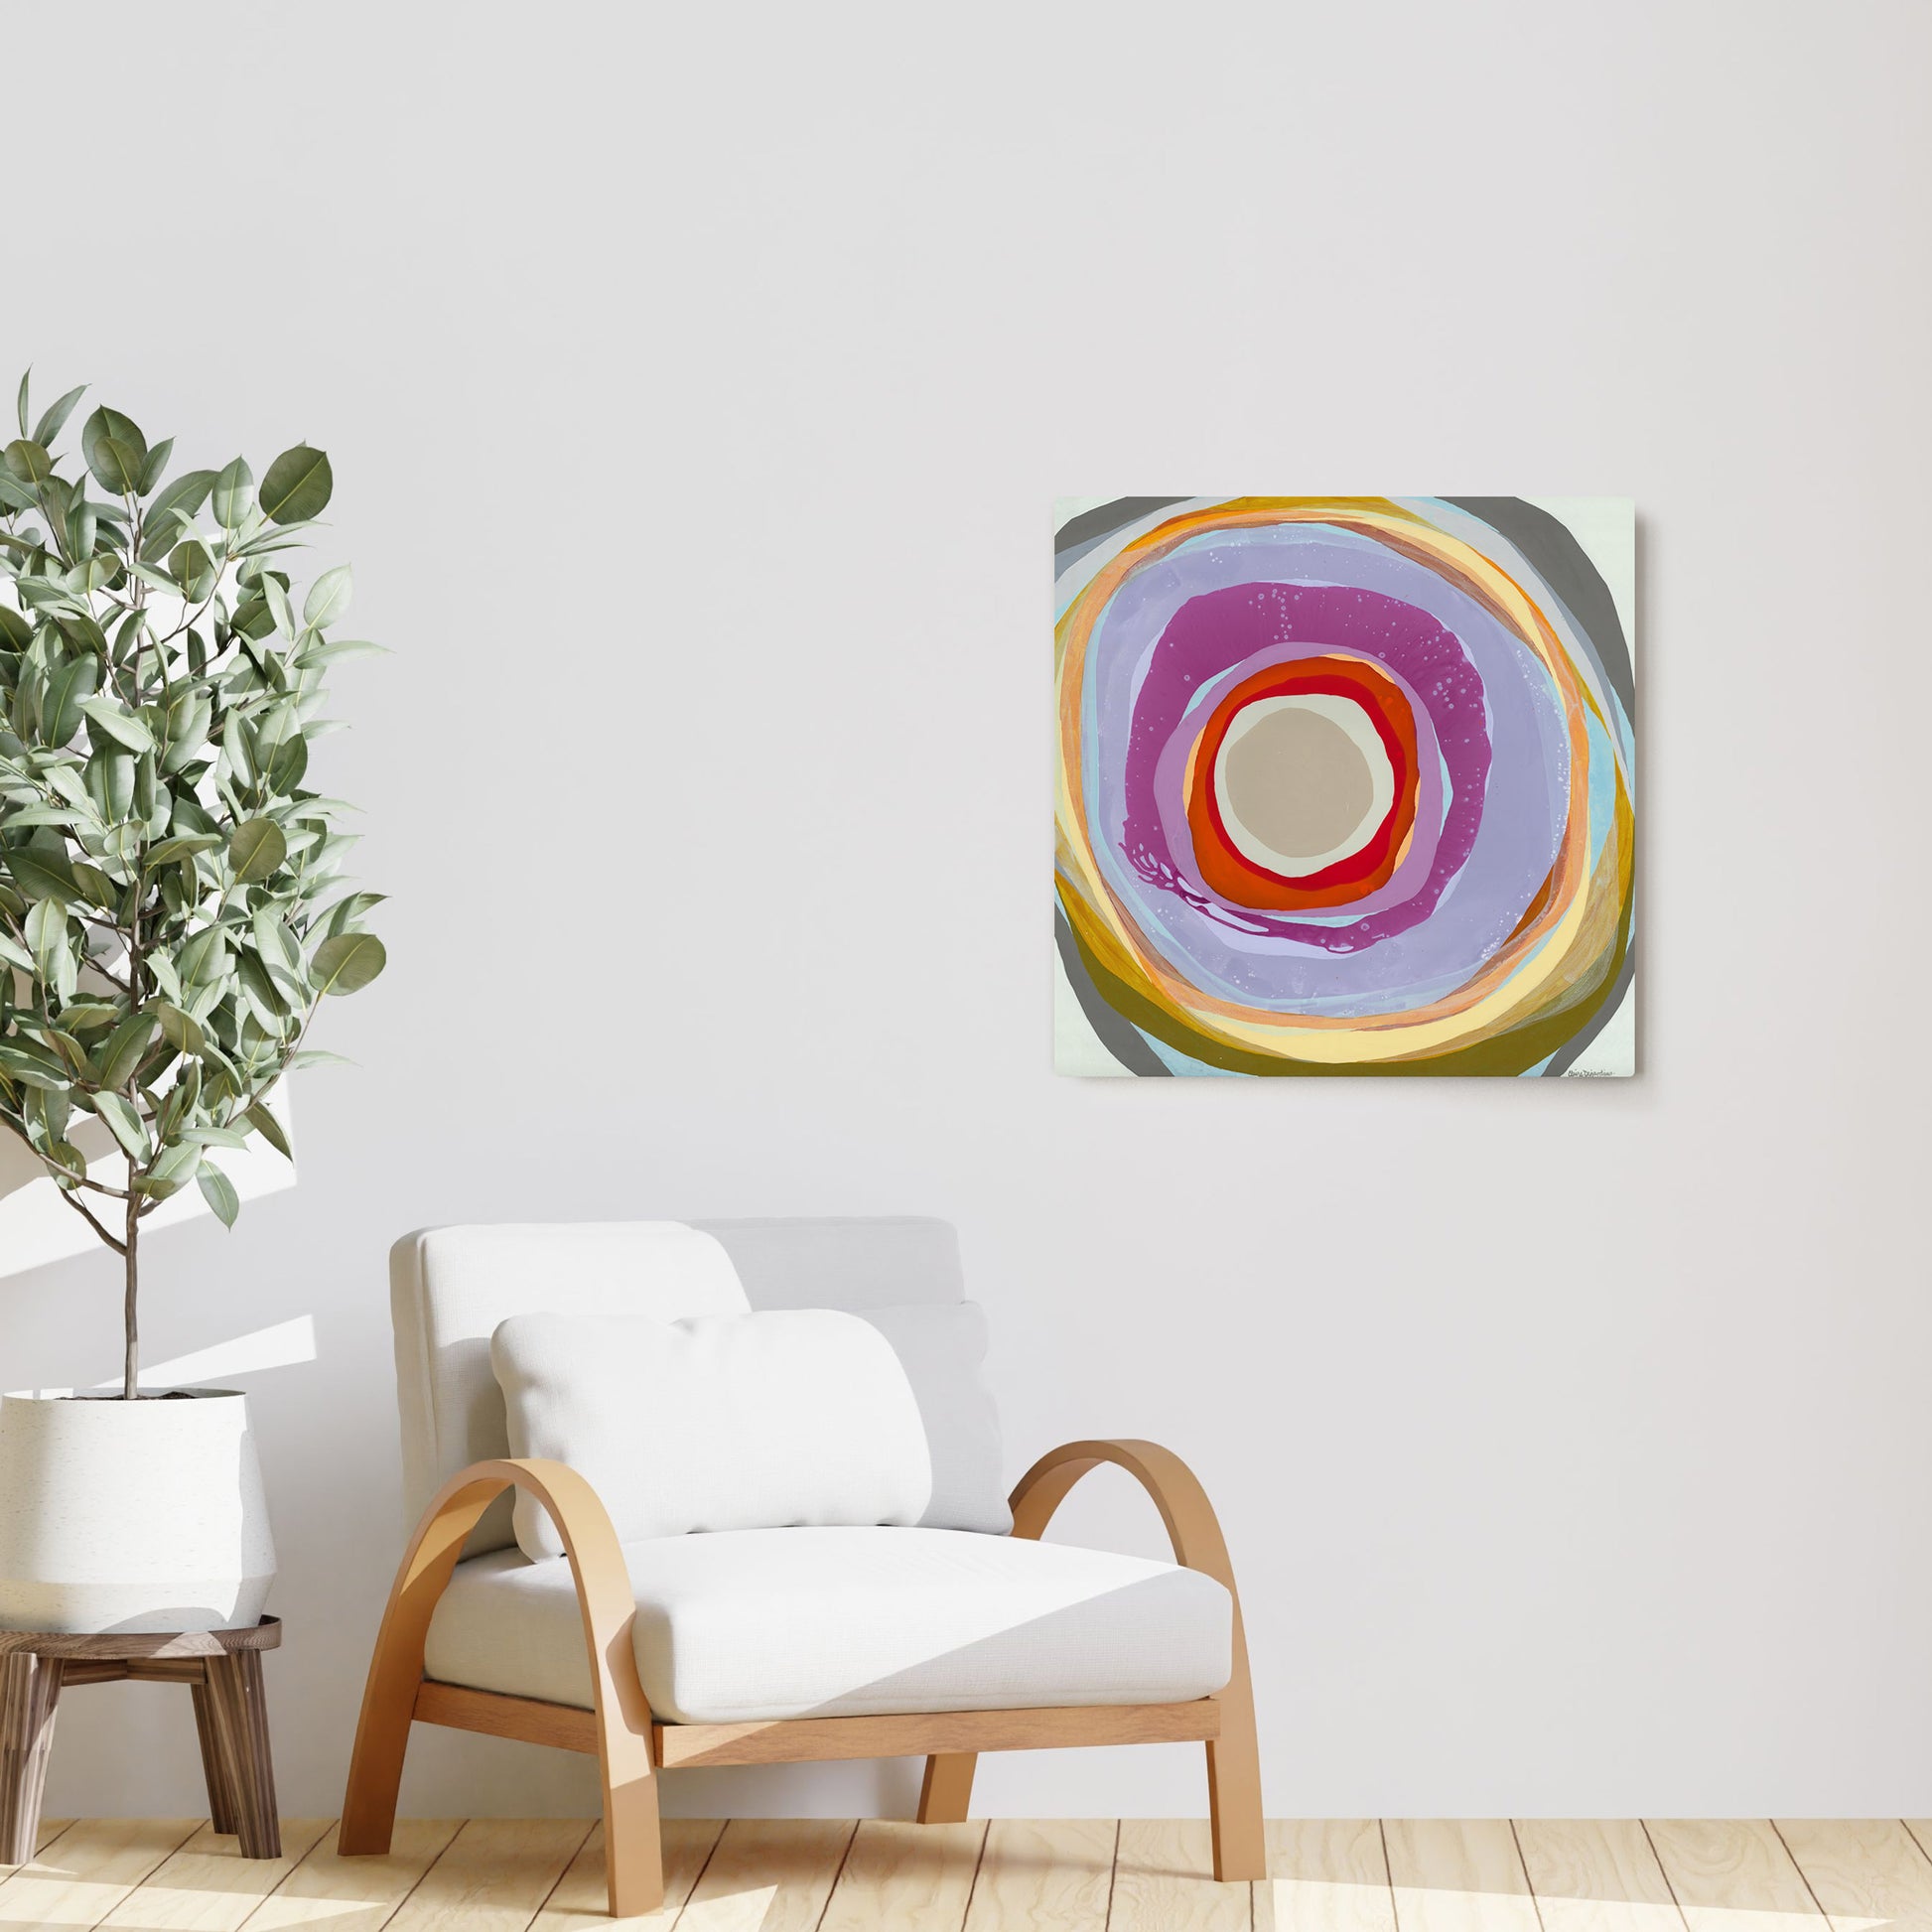 Claire Desjardins' On A Whim painting reproduced on HD metal print and displayed on wall